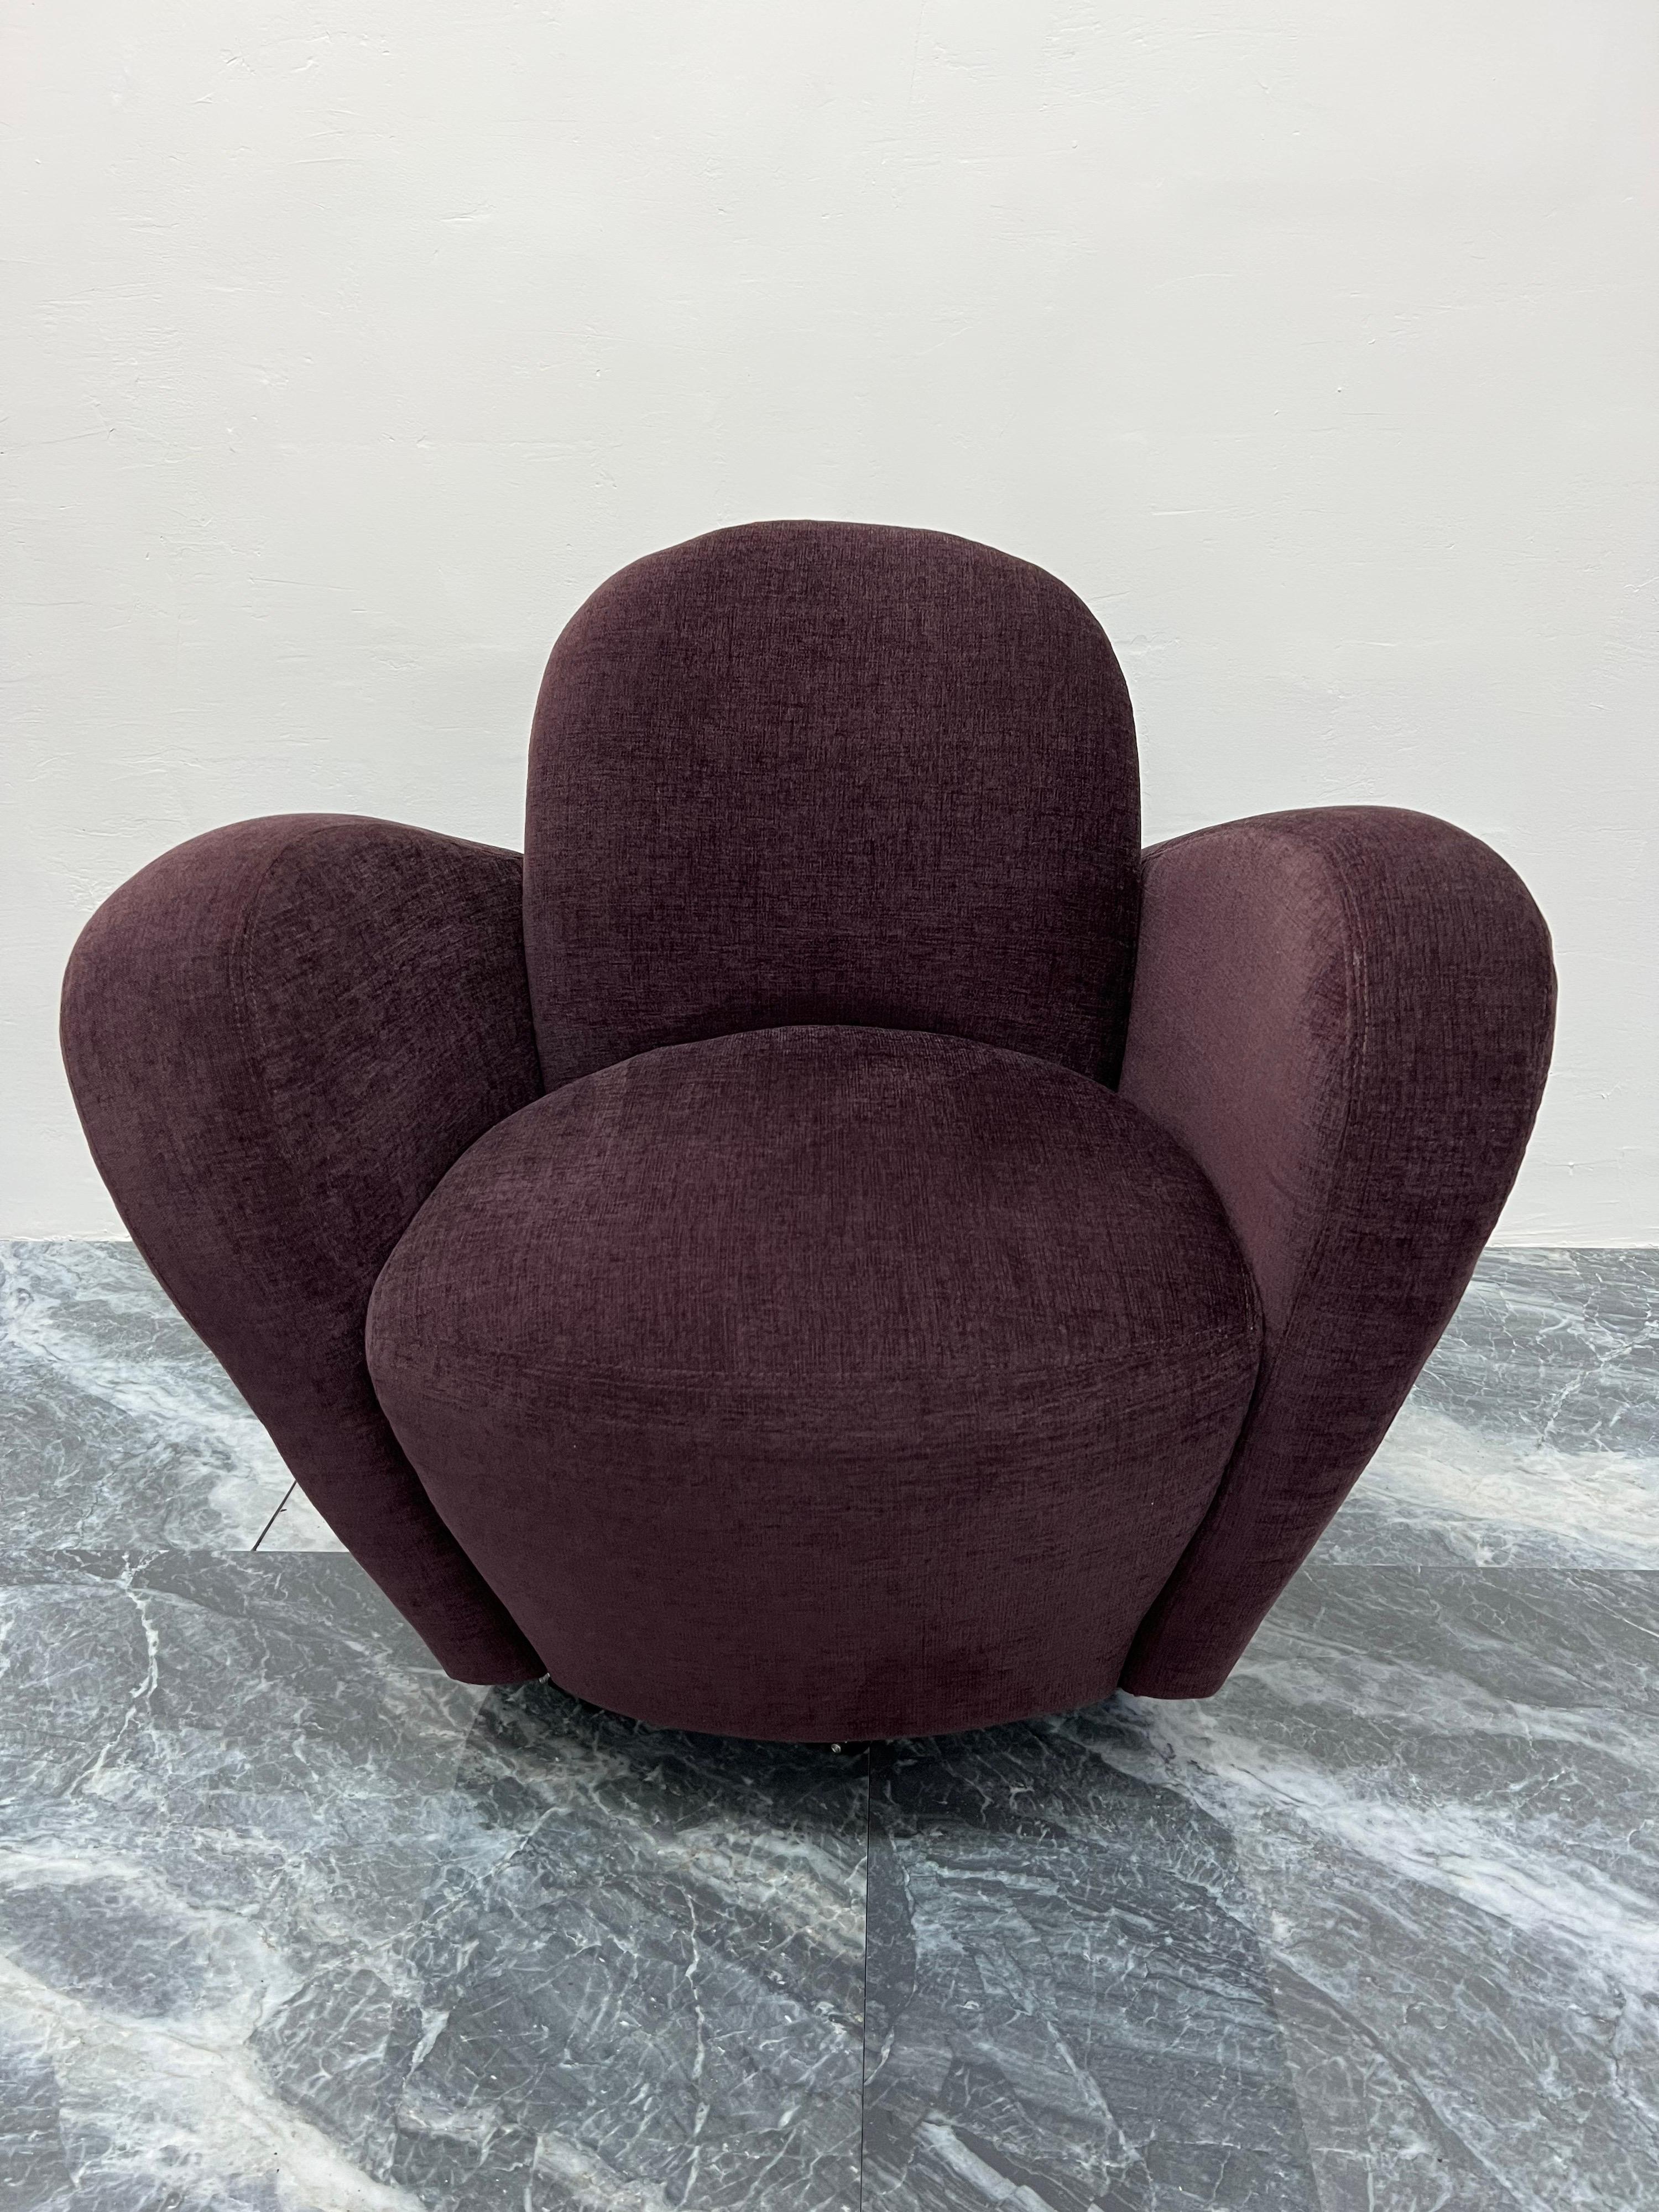 Iconic Michael Wolk designed Miami lounge chair. The chair sits on five casters and maintains its original Eggplant upholstery which is in excellent condition for age and use.

While driving through Coconut Grove, Florida in the early 1980s, Wolk